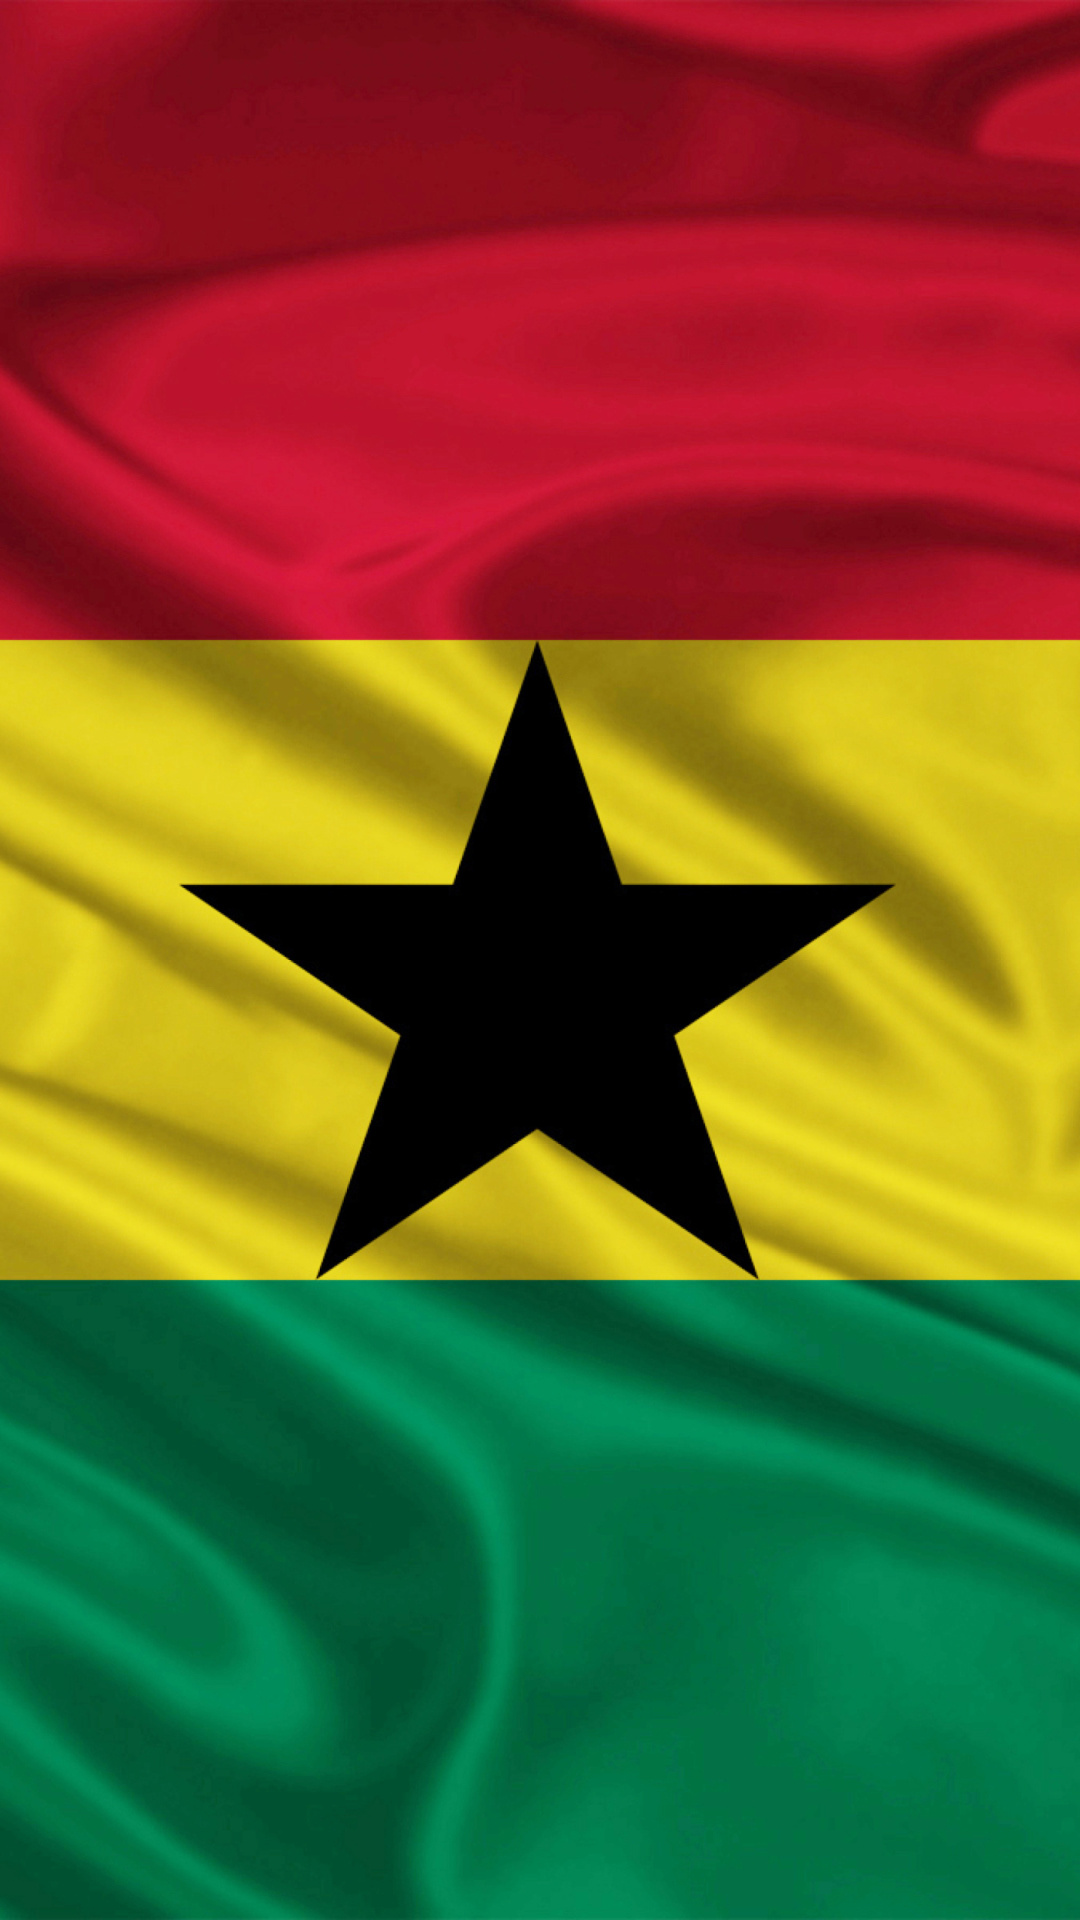 Flag: Adopted upon the independence of the Dominion of Ghana on March 6, 1957, Emblem. 1080x1920 Full HD Wallpaper.